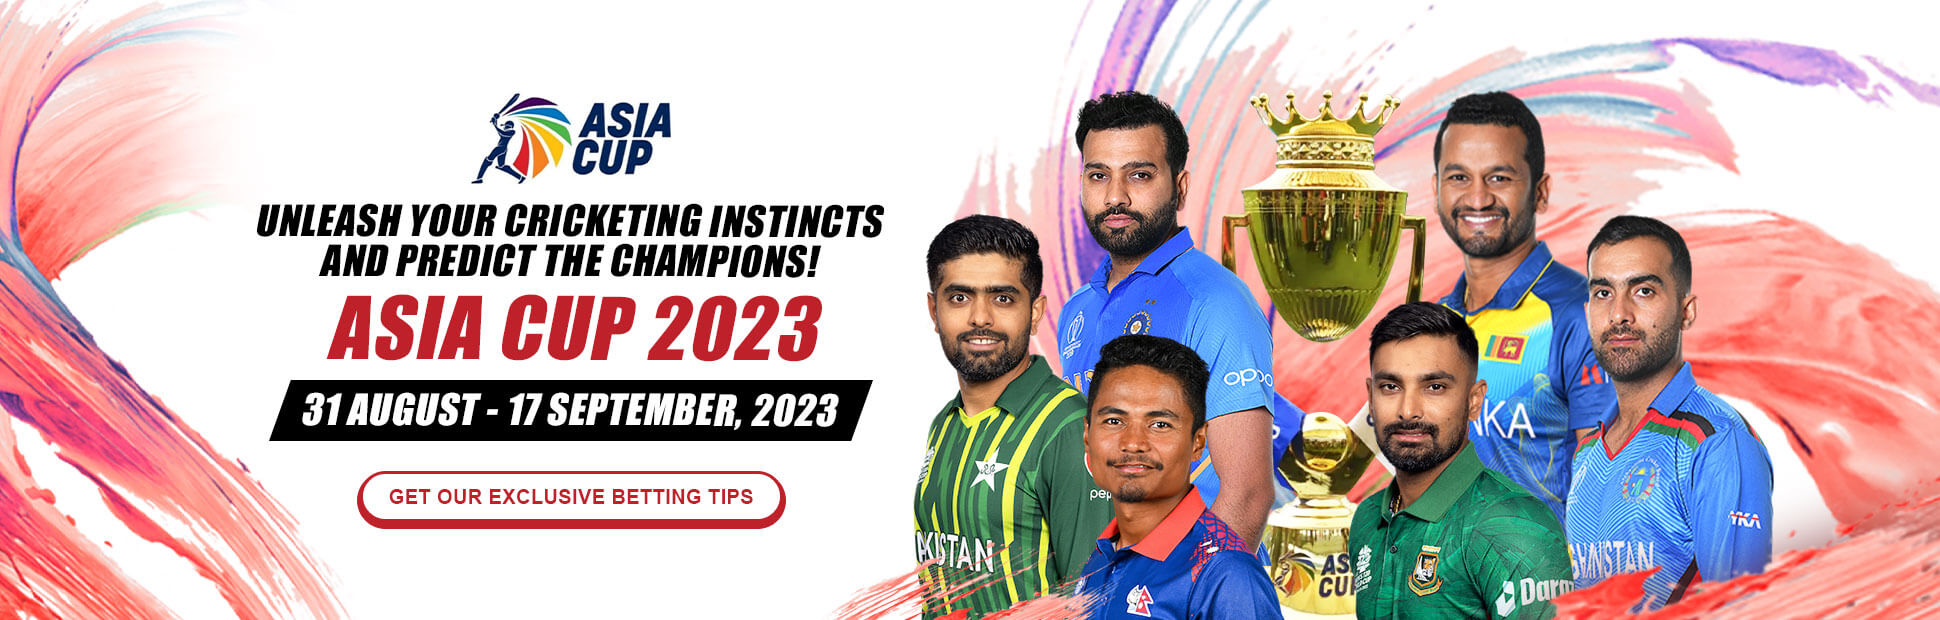 Asia Cup 2023 banner